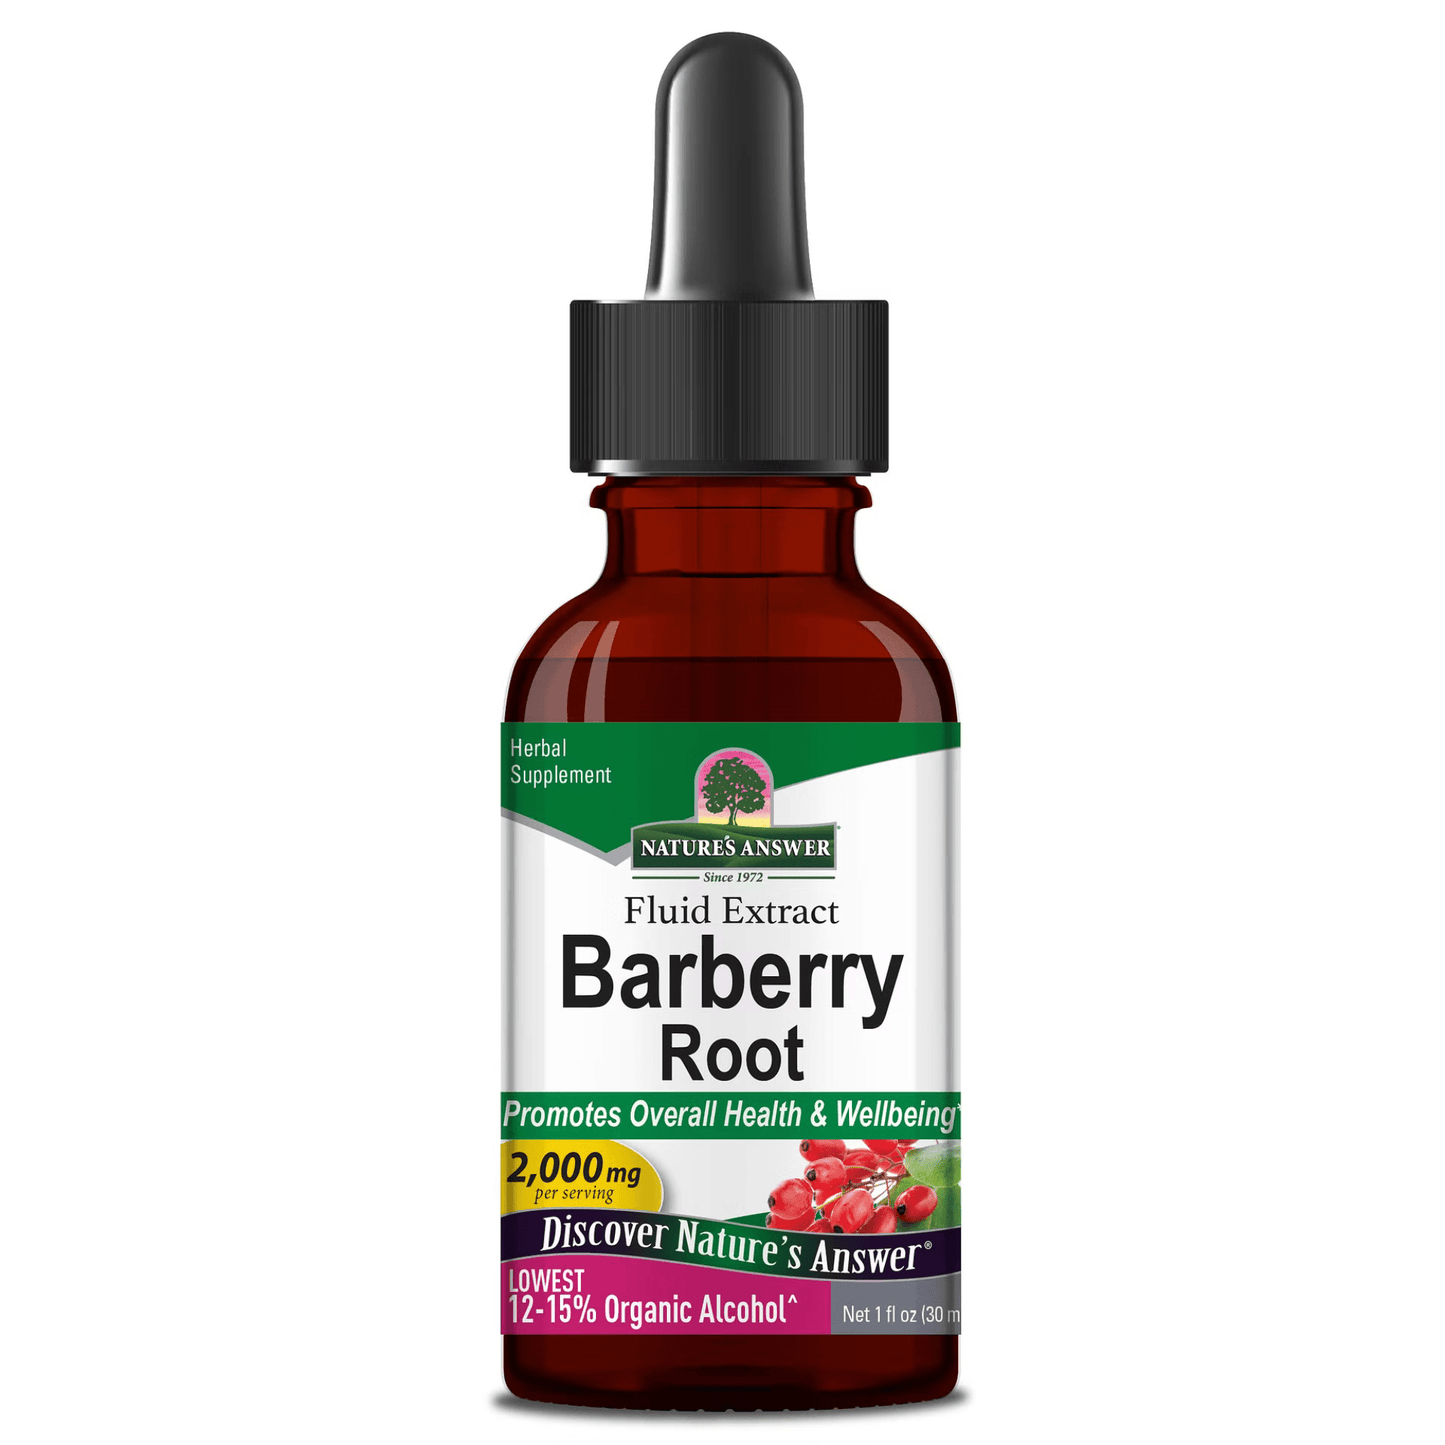 Primary Image of Barberry Root Extract